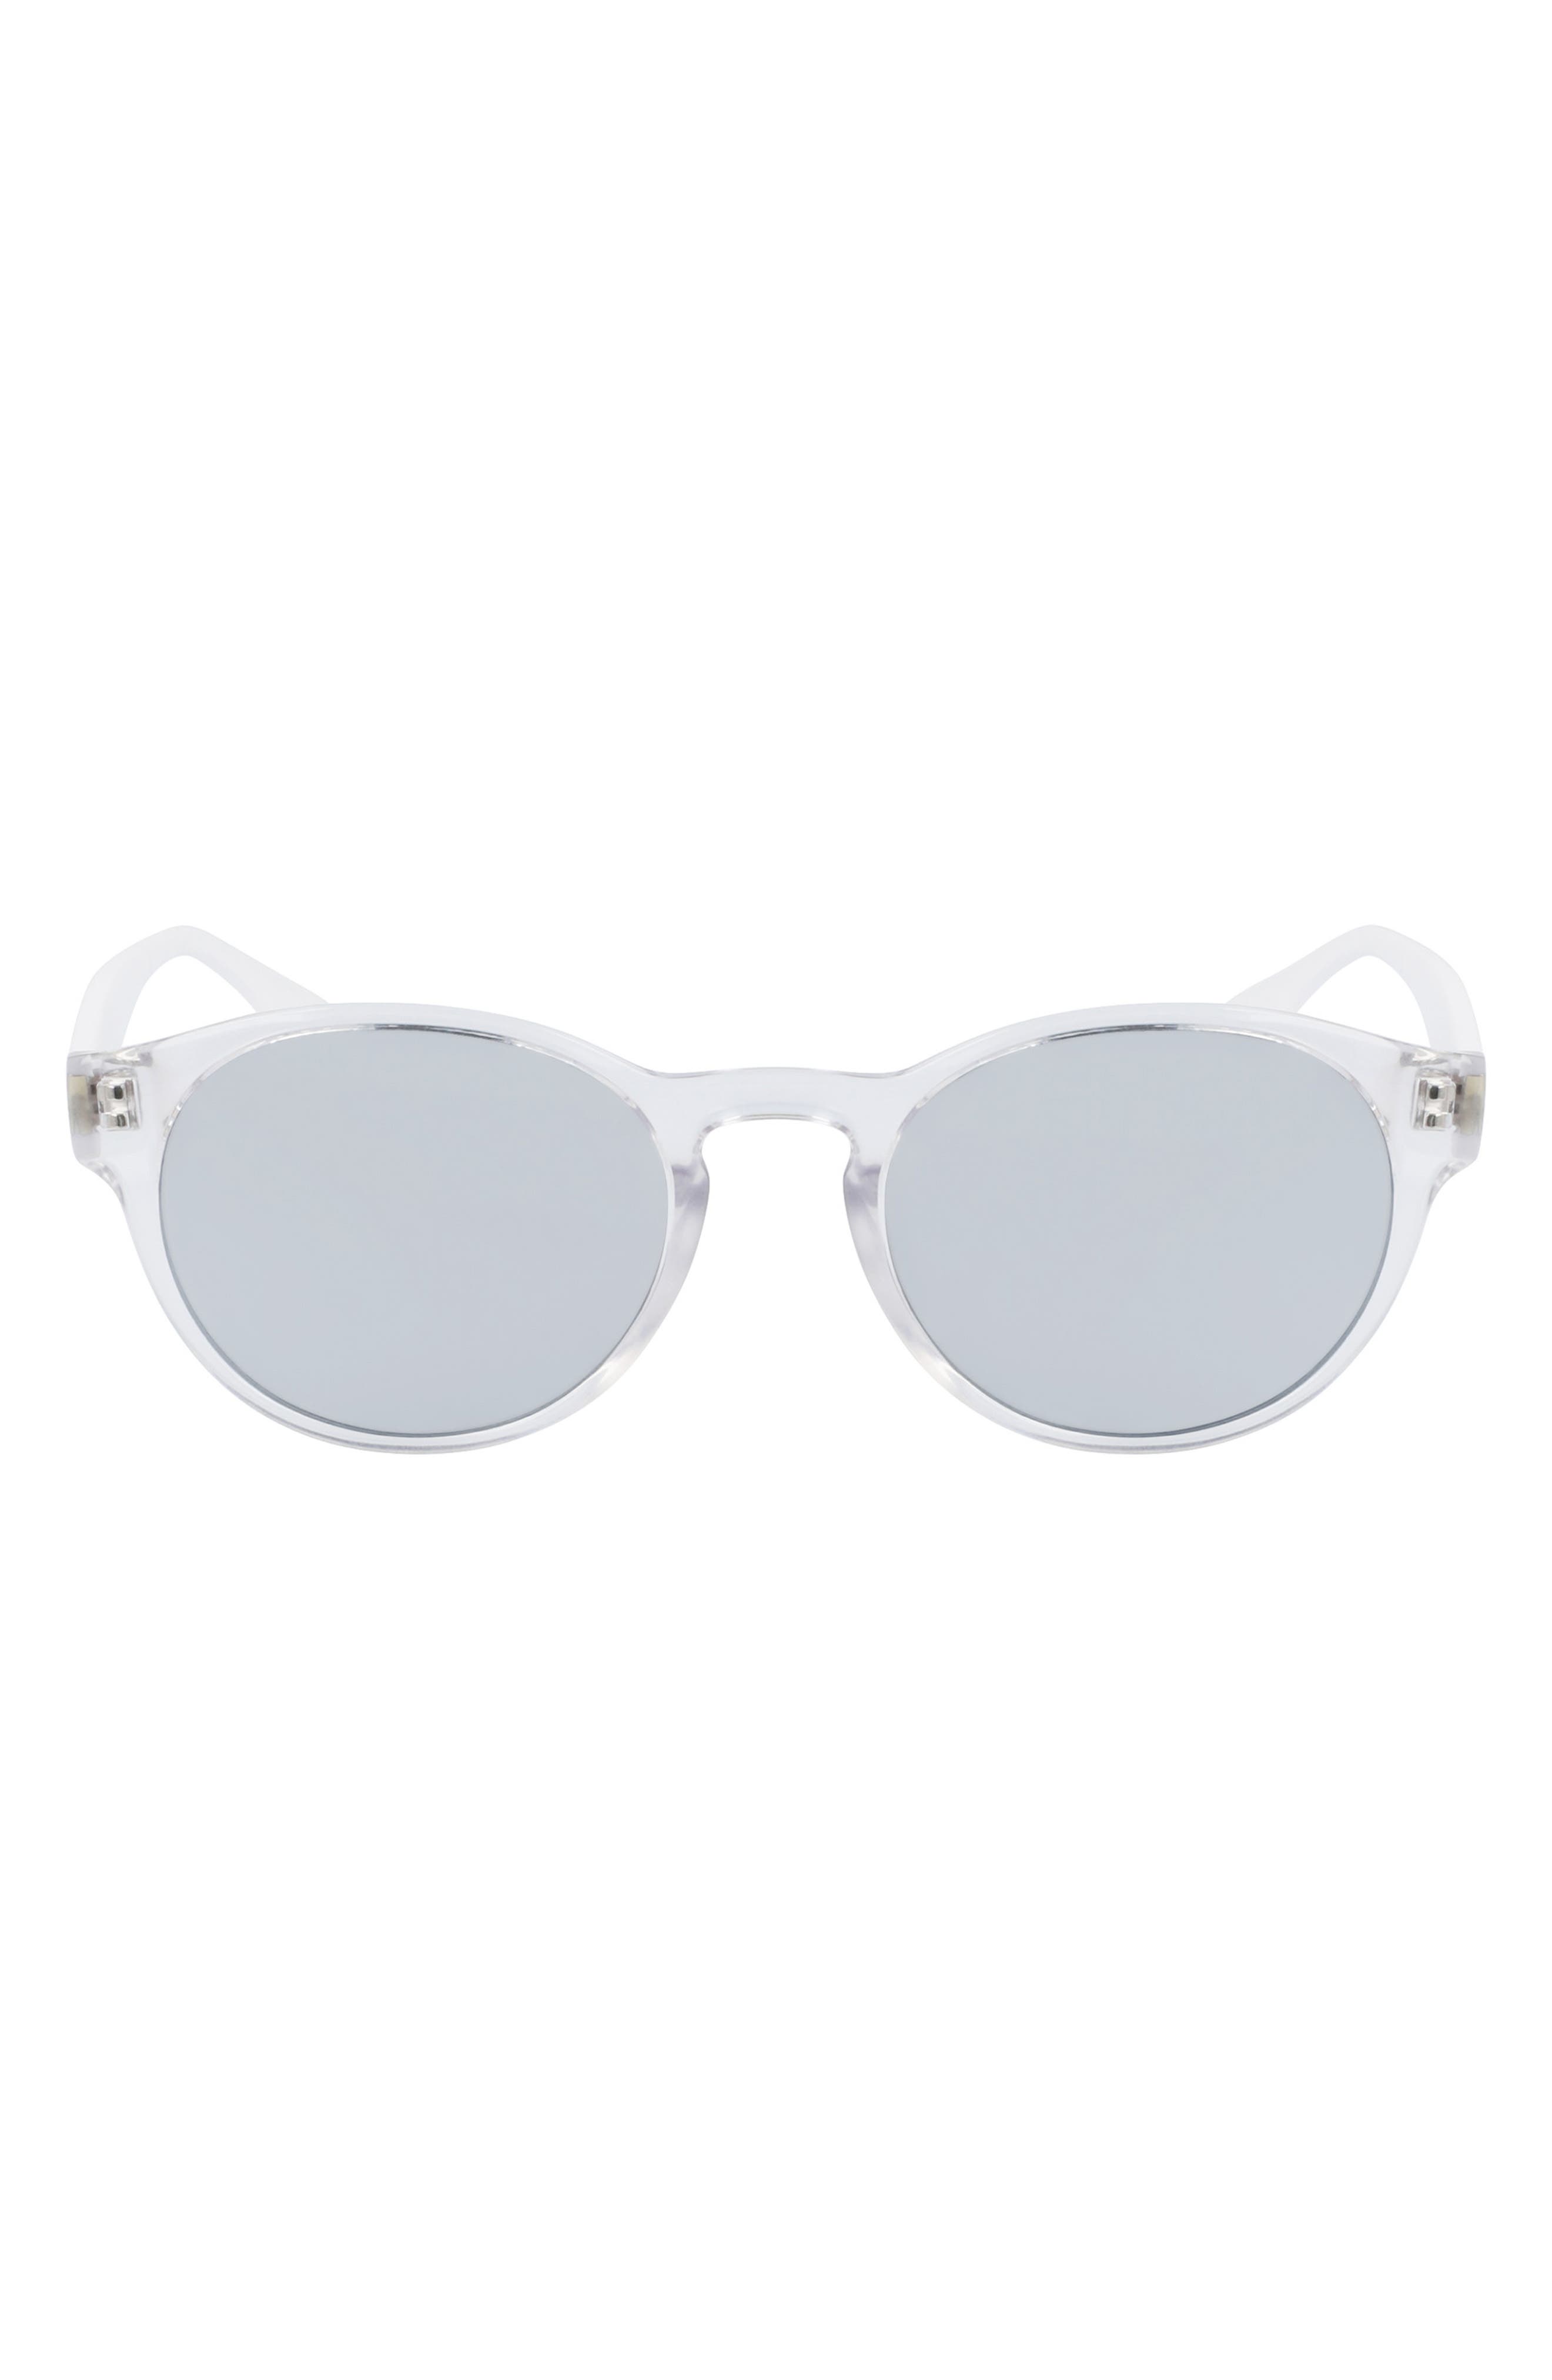 UPC 886895509244 product image for Converse Malden 51mm Round Sunglasses in Crystal Clear /Silver Mirror at Nordstr | upcitemdb.com